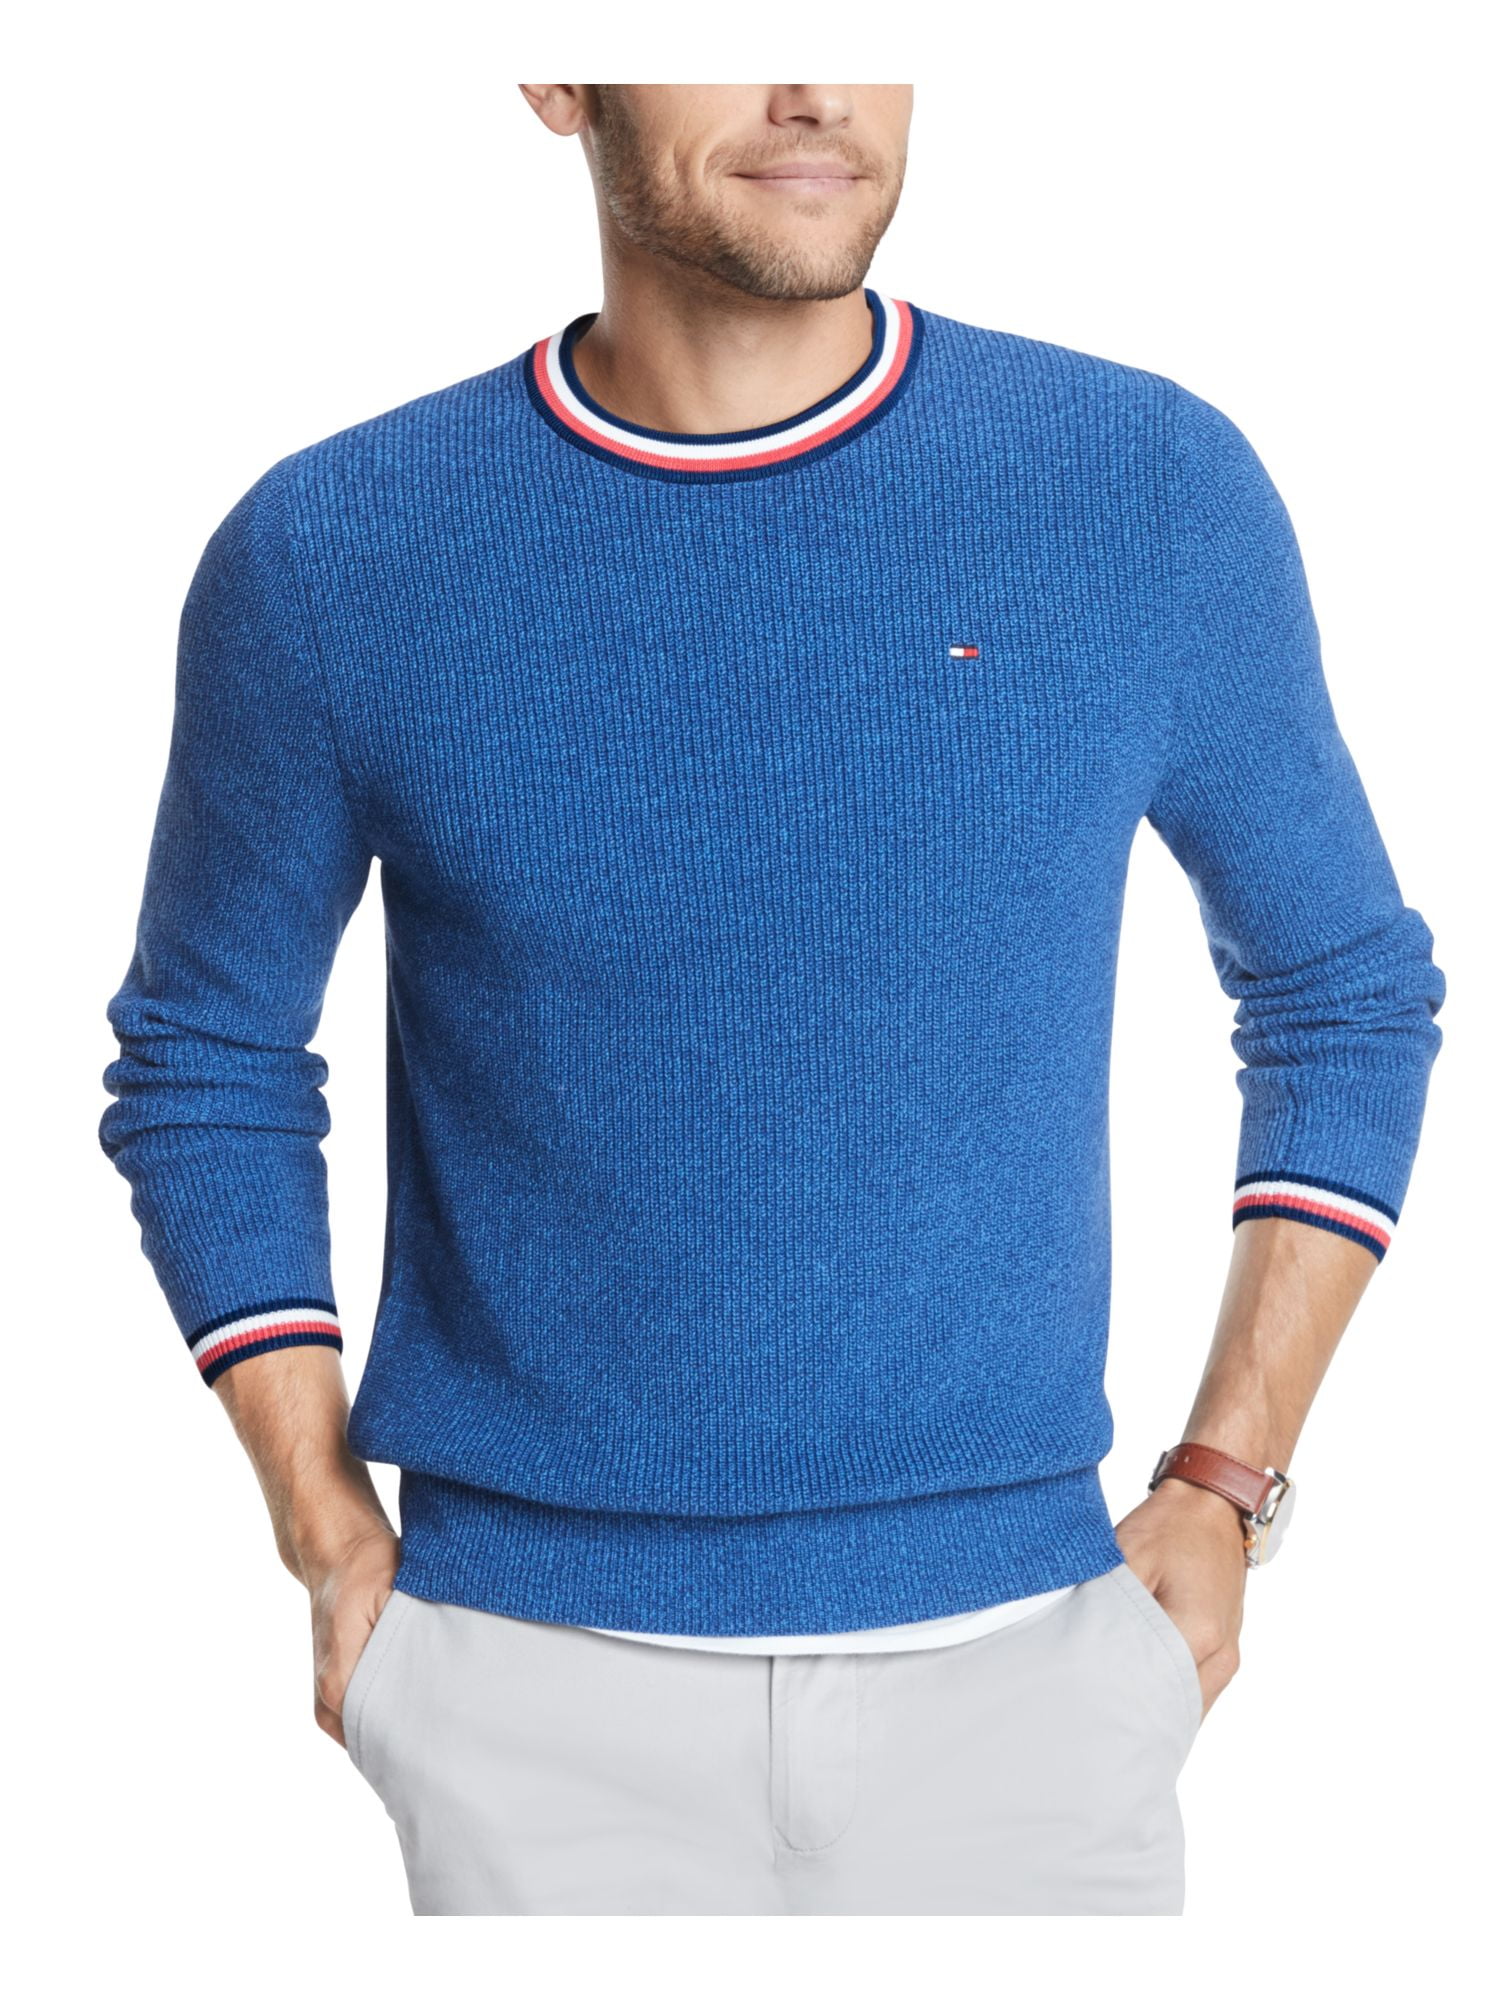 TOMMY HILFIGER Mens Blue Long Sleeve Pullover Fit Classic XXL Neck Knit Crew Sweater